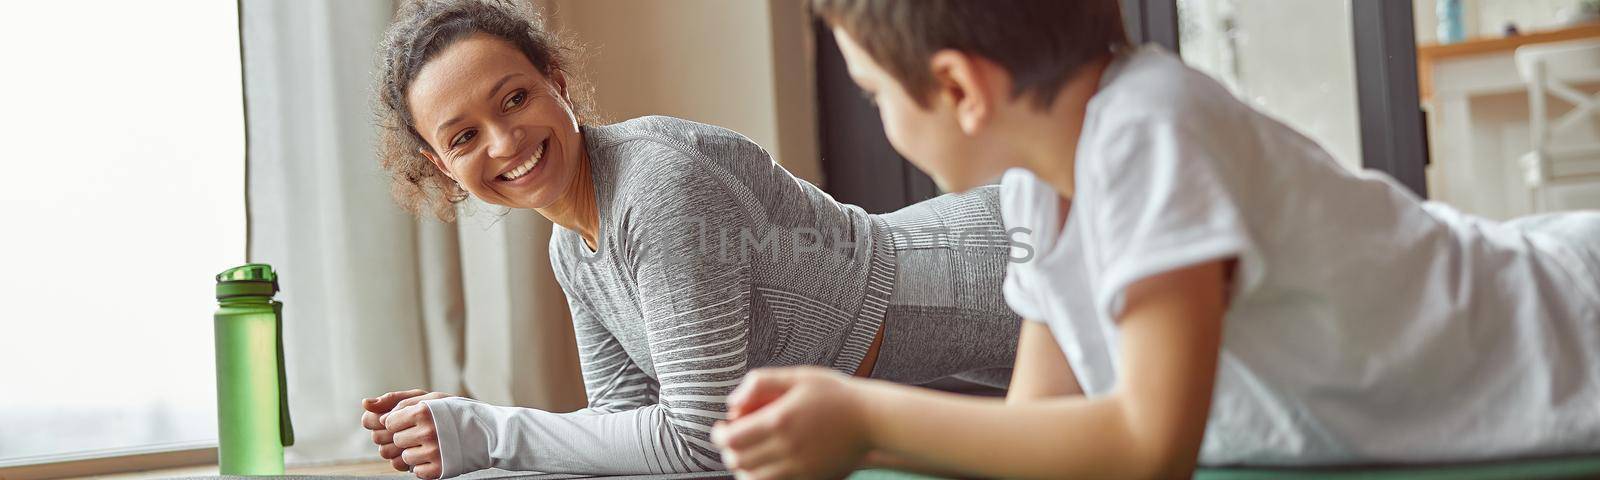 Low angle of smiling woman looking with love at little boy while doing plank together